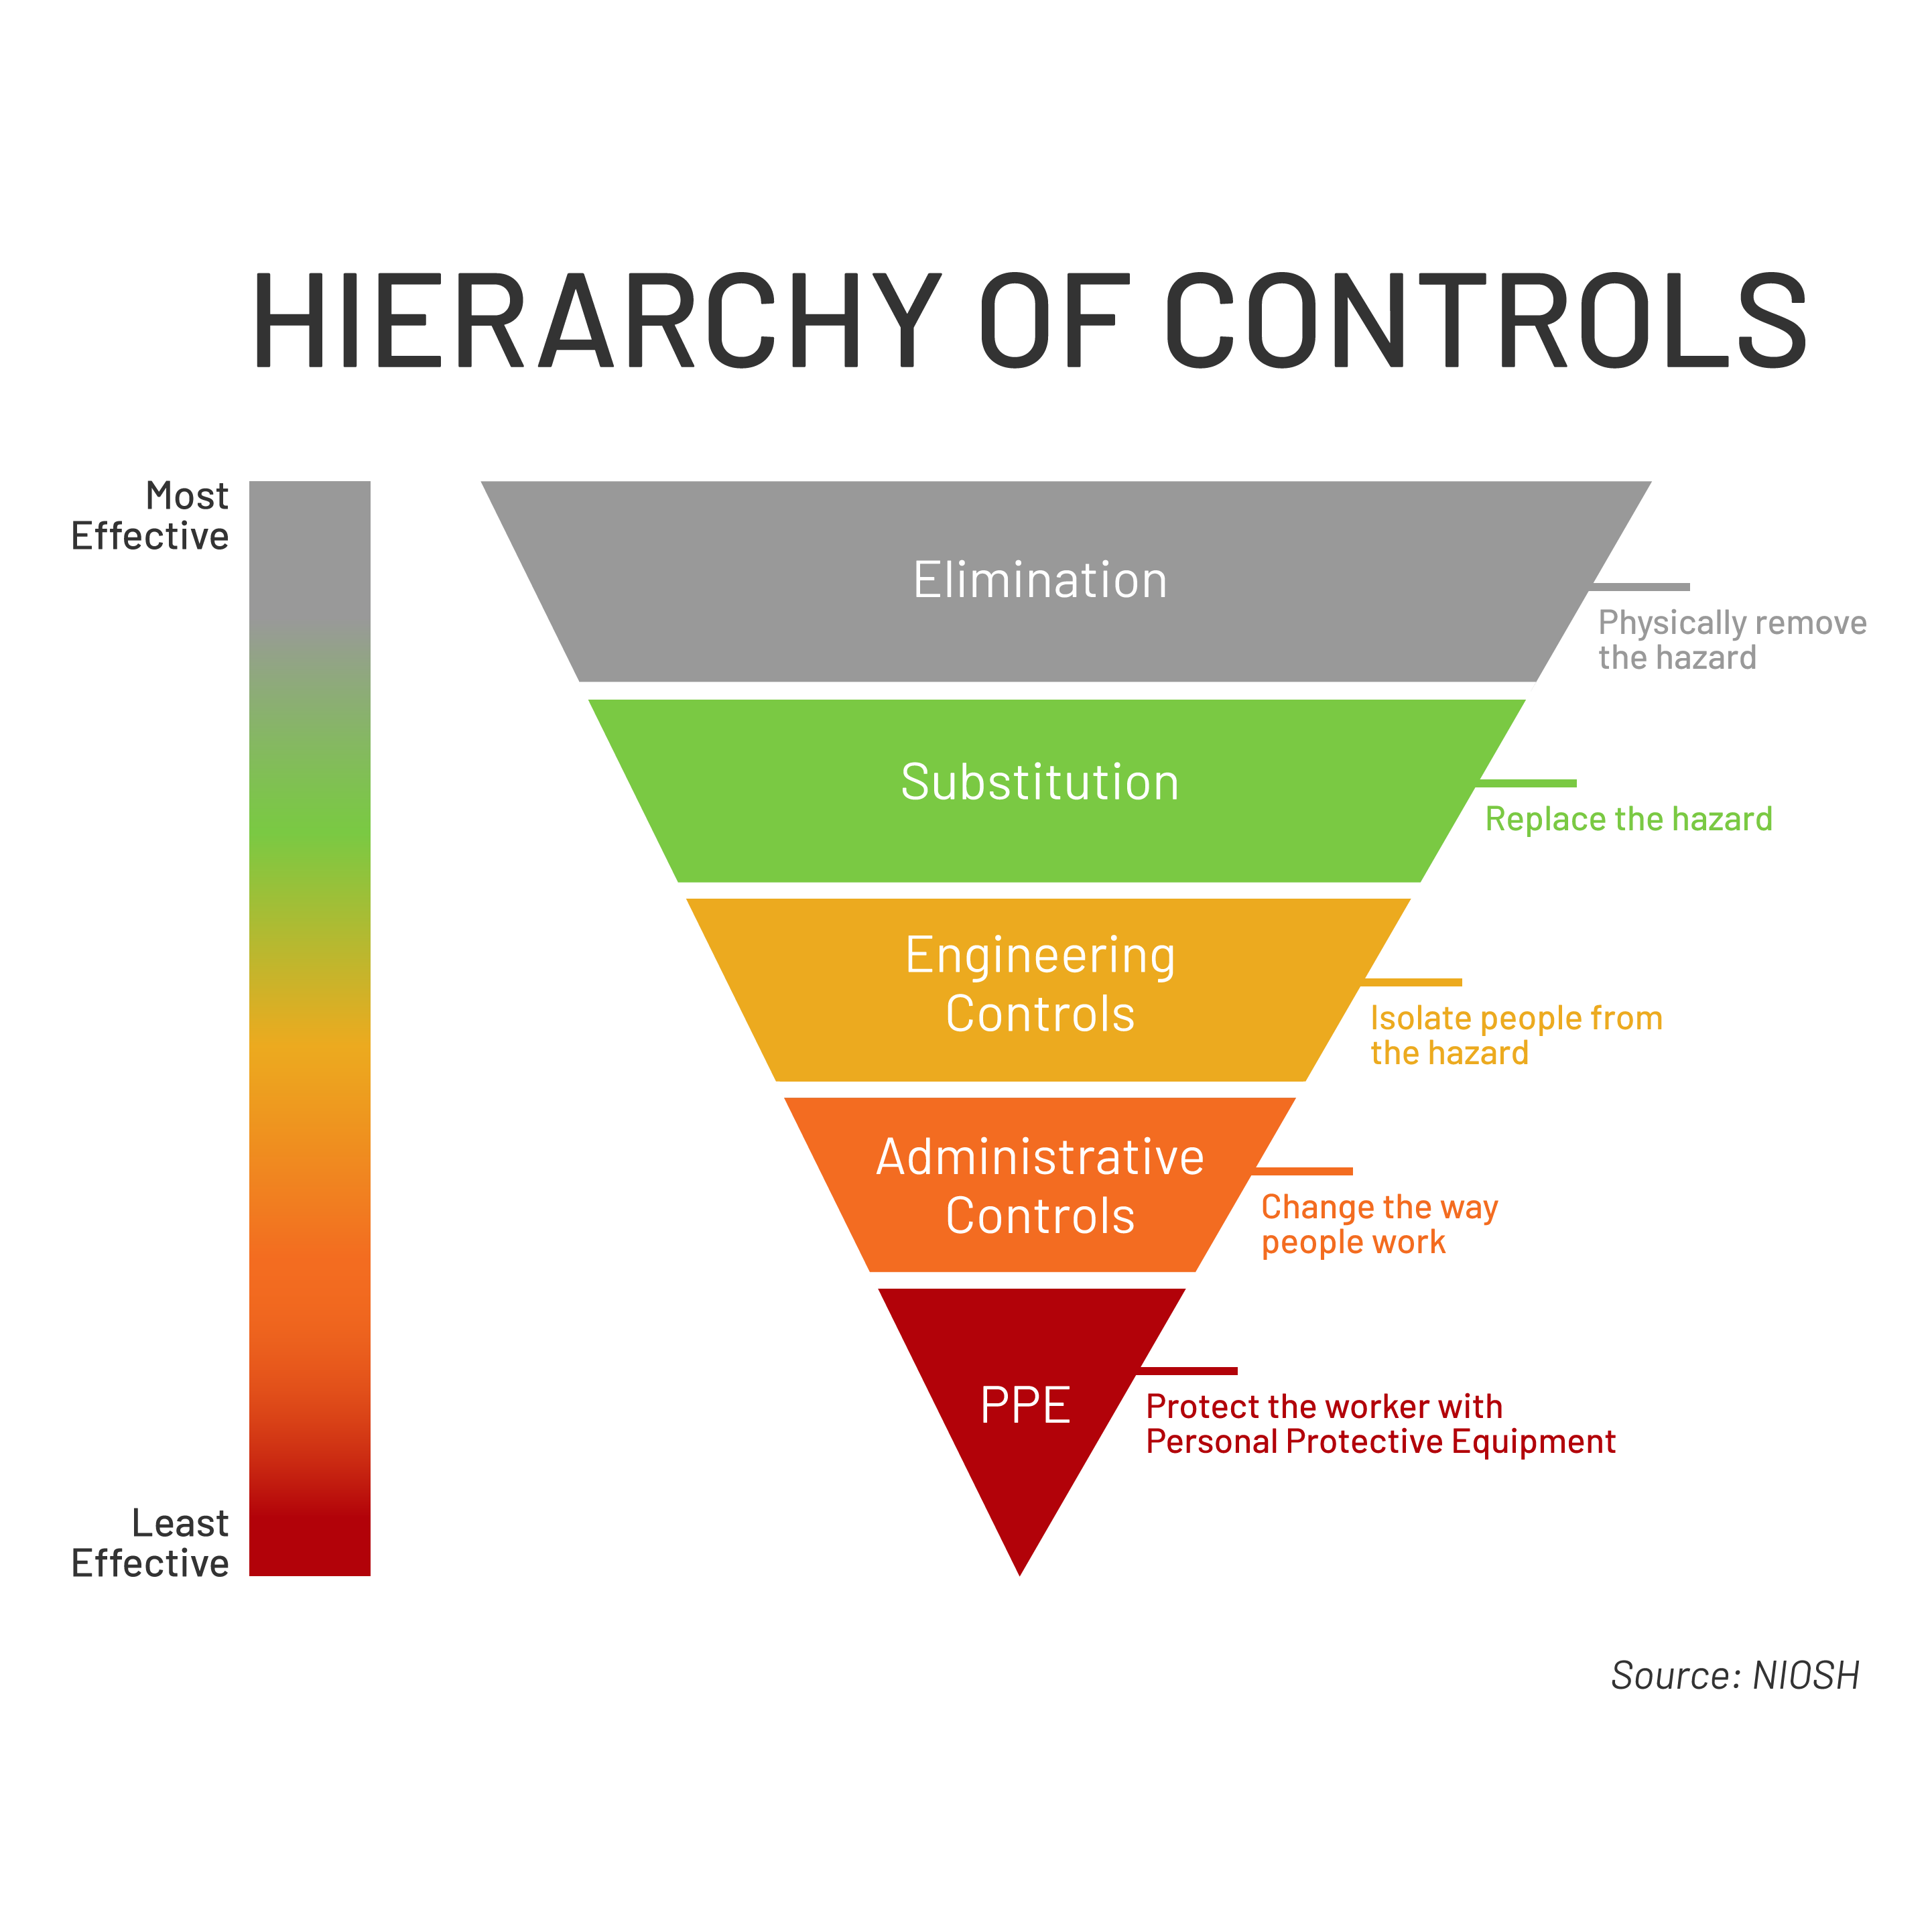 chart showing hierarchy of controls in an inverted triangle; least effective at bottom, most effective at top: PPE, Administrative Controls, Engineering Controls, Substitution, Elimination